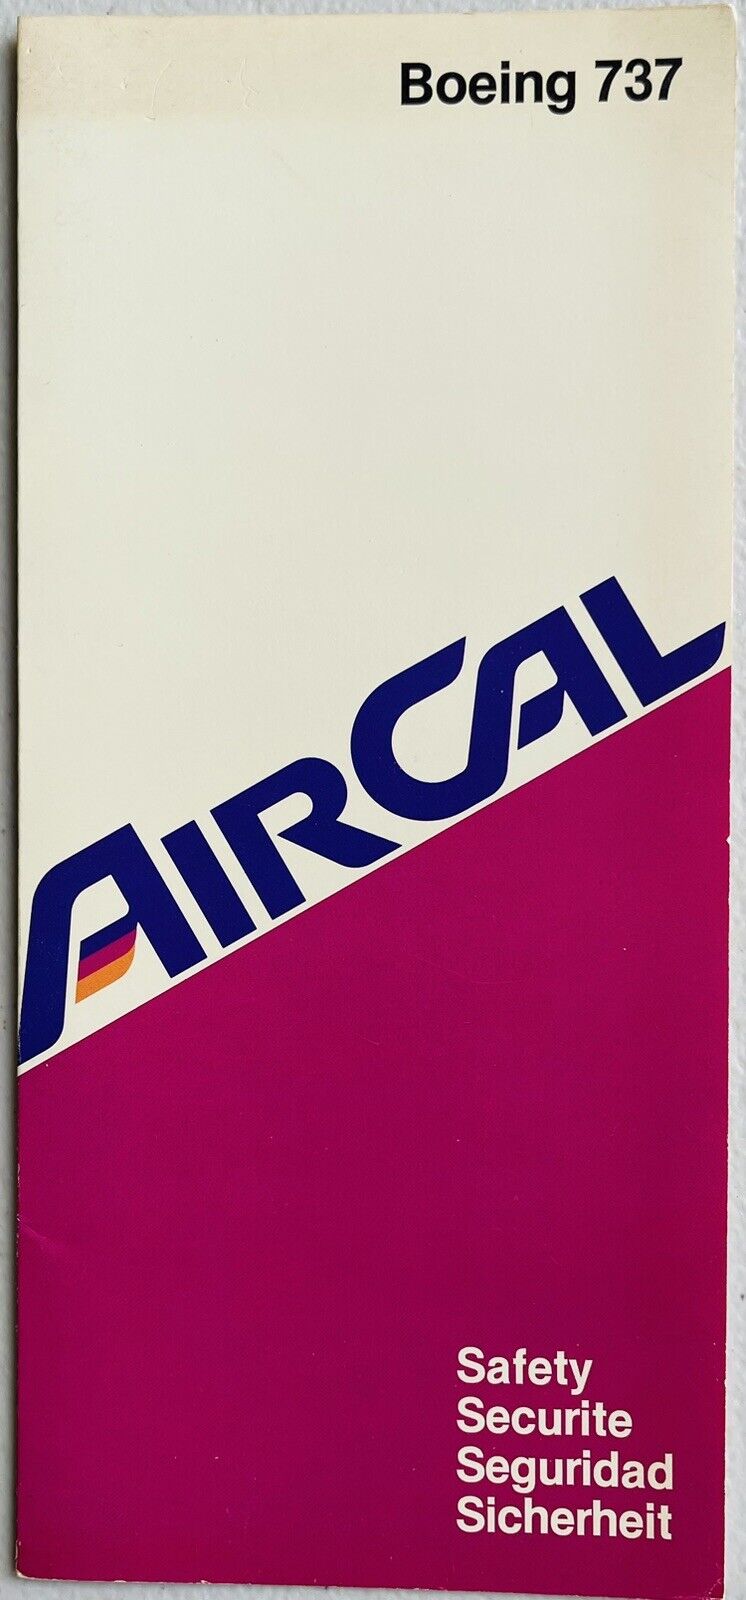 AirCal Air California Airlines Safety Card - Boeing 737 - No Date